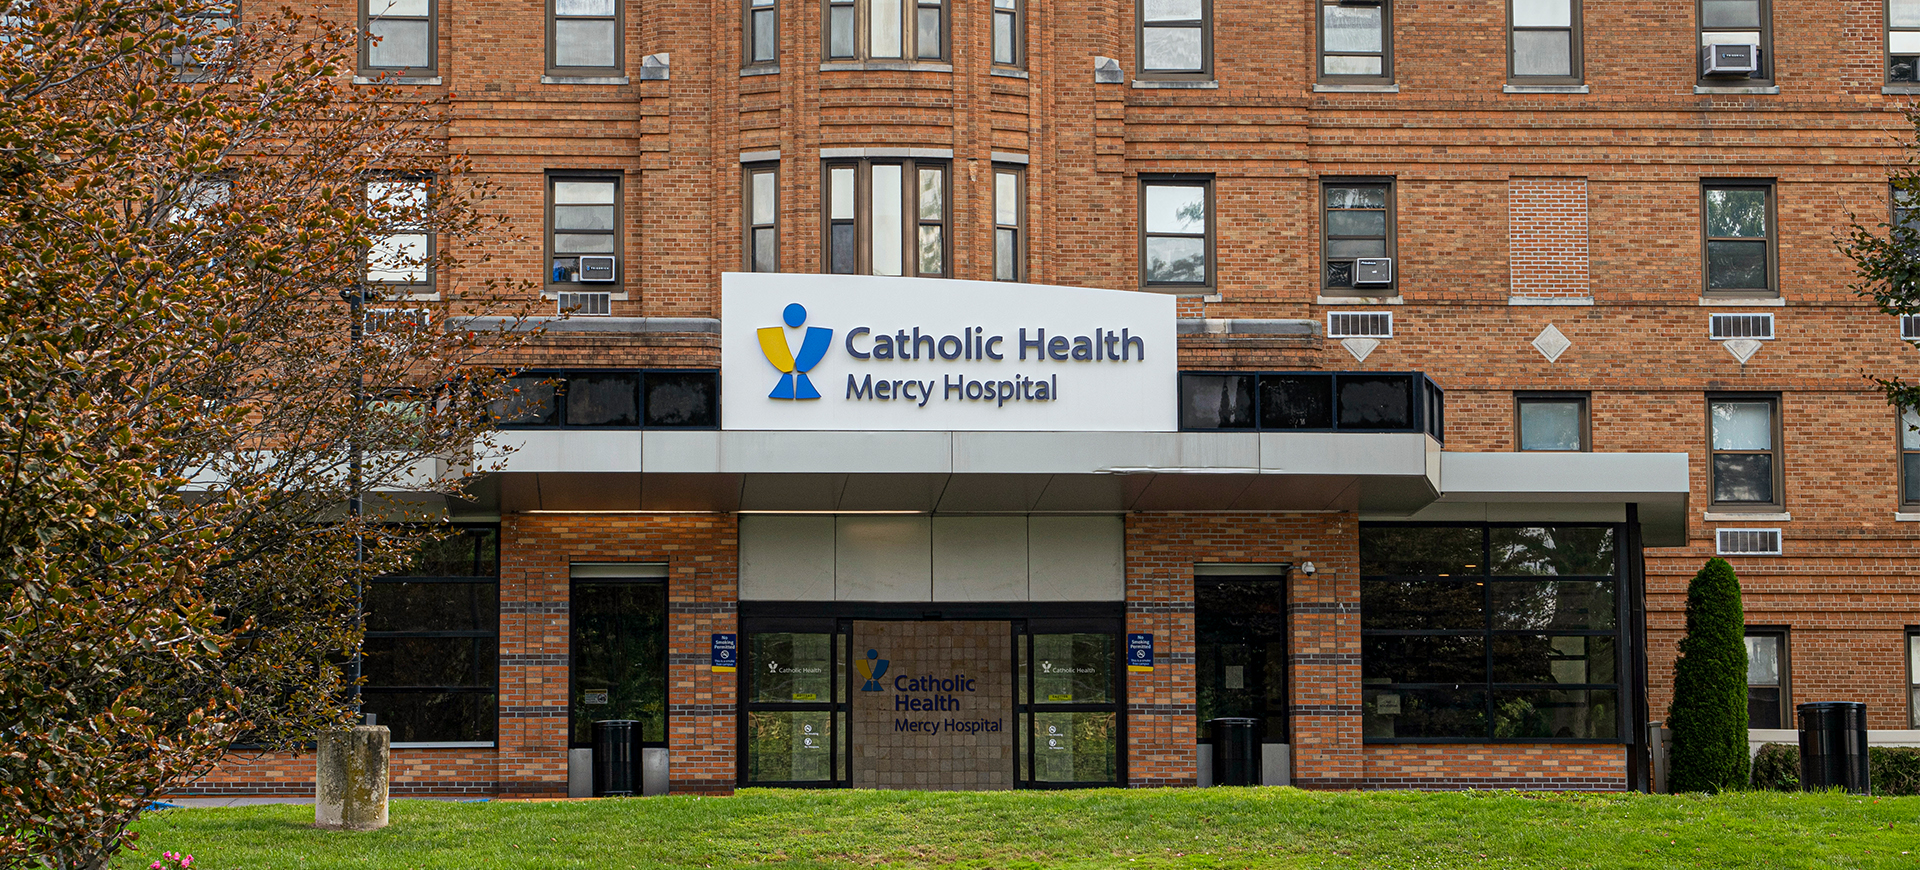       	        
	  	  Center for Hyperbaric Medicine & Wound Healing at Mercy Hospital
	  	  
	        